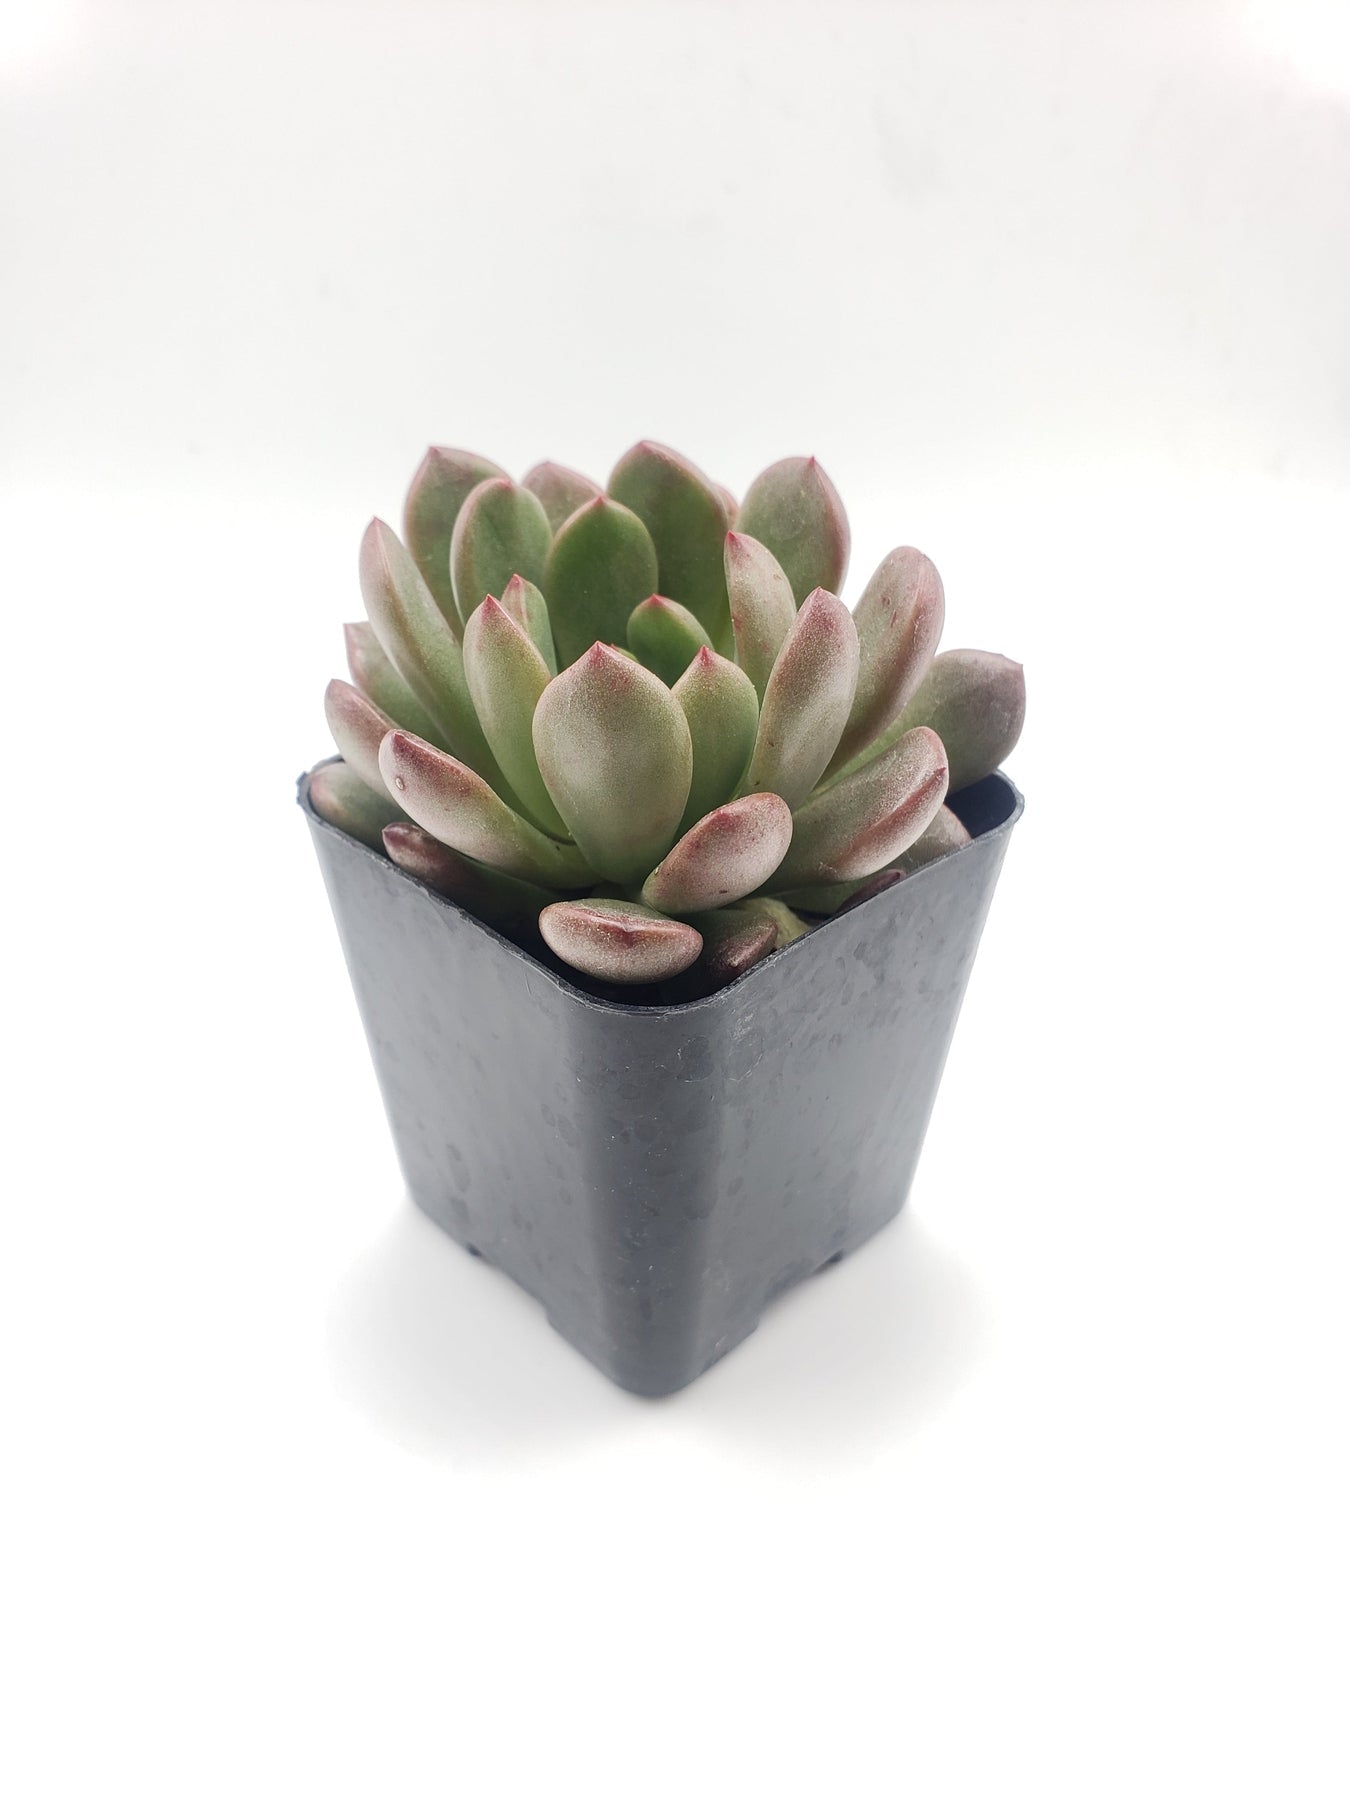 #20 Sedeveria Bashful-Succulent - Small - Exact 2in Type-The Succulent Source